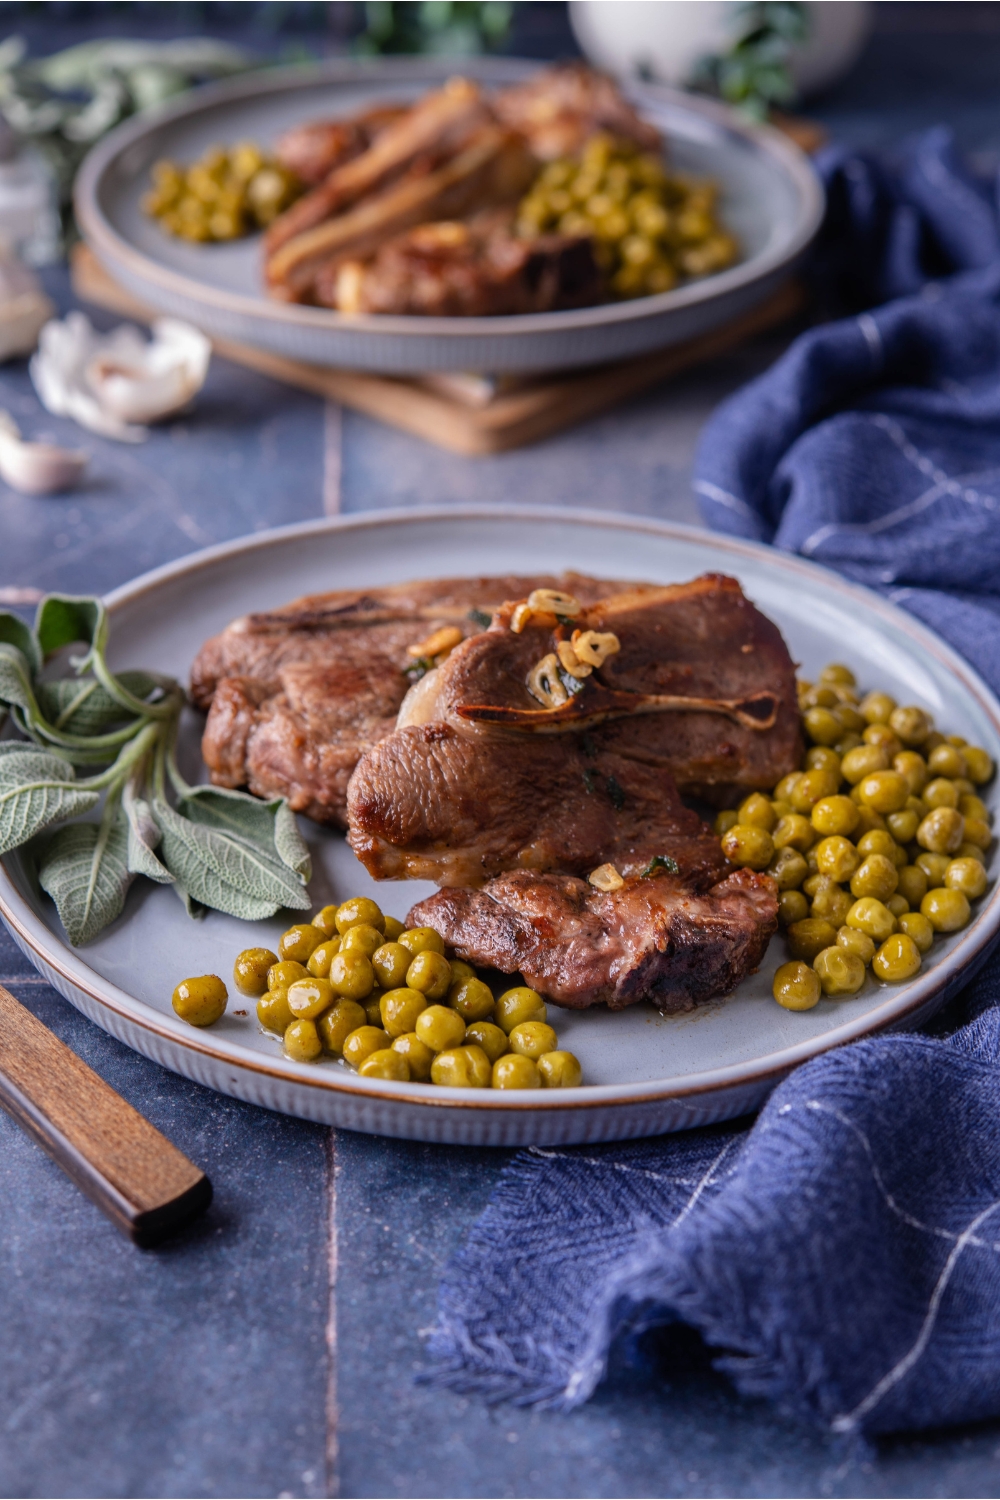 Pan seared lamb chops on a blue plate with a side of cooked peas. There's a garnish if fresh sage on the plate. Next to the plate is a set of silverware and there is a second plate of lamb chops in the background.